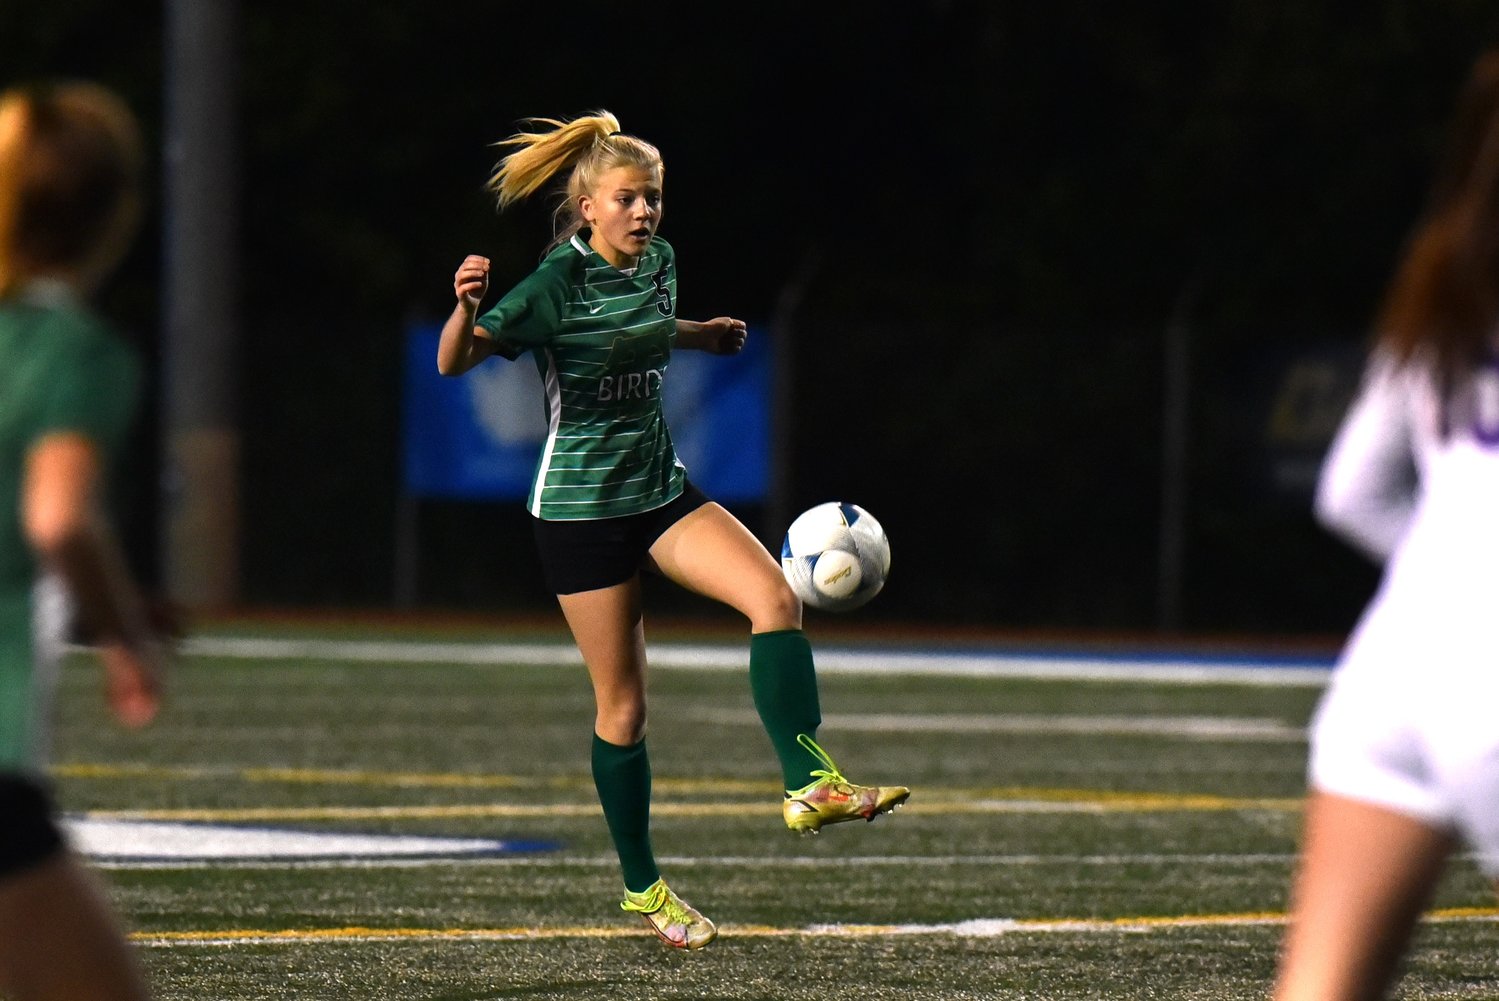 Sophie Boatright takes a touch to control the ball during Tumwater's 3-1 loss to Columbia River in the 2A state semifinals, at Shoreline Stadium on Nov. 18.